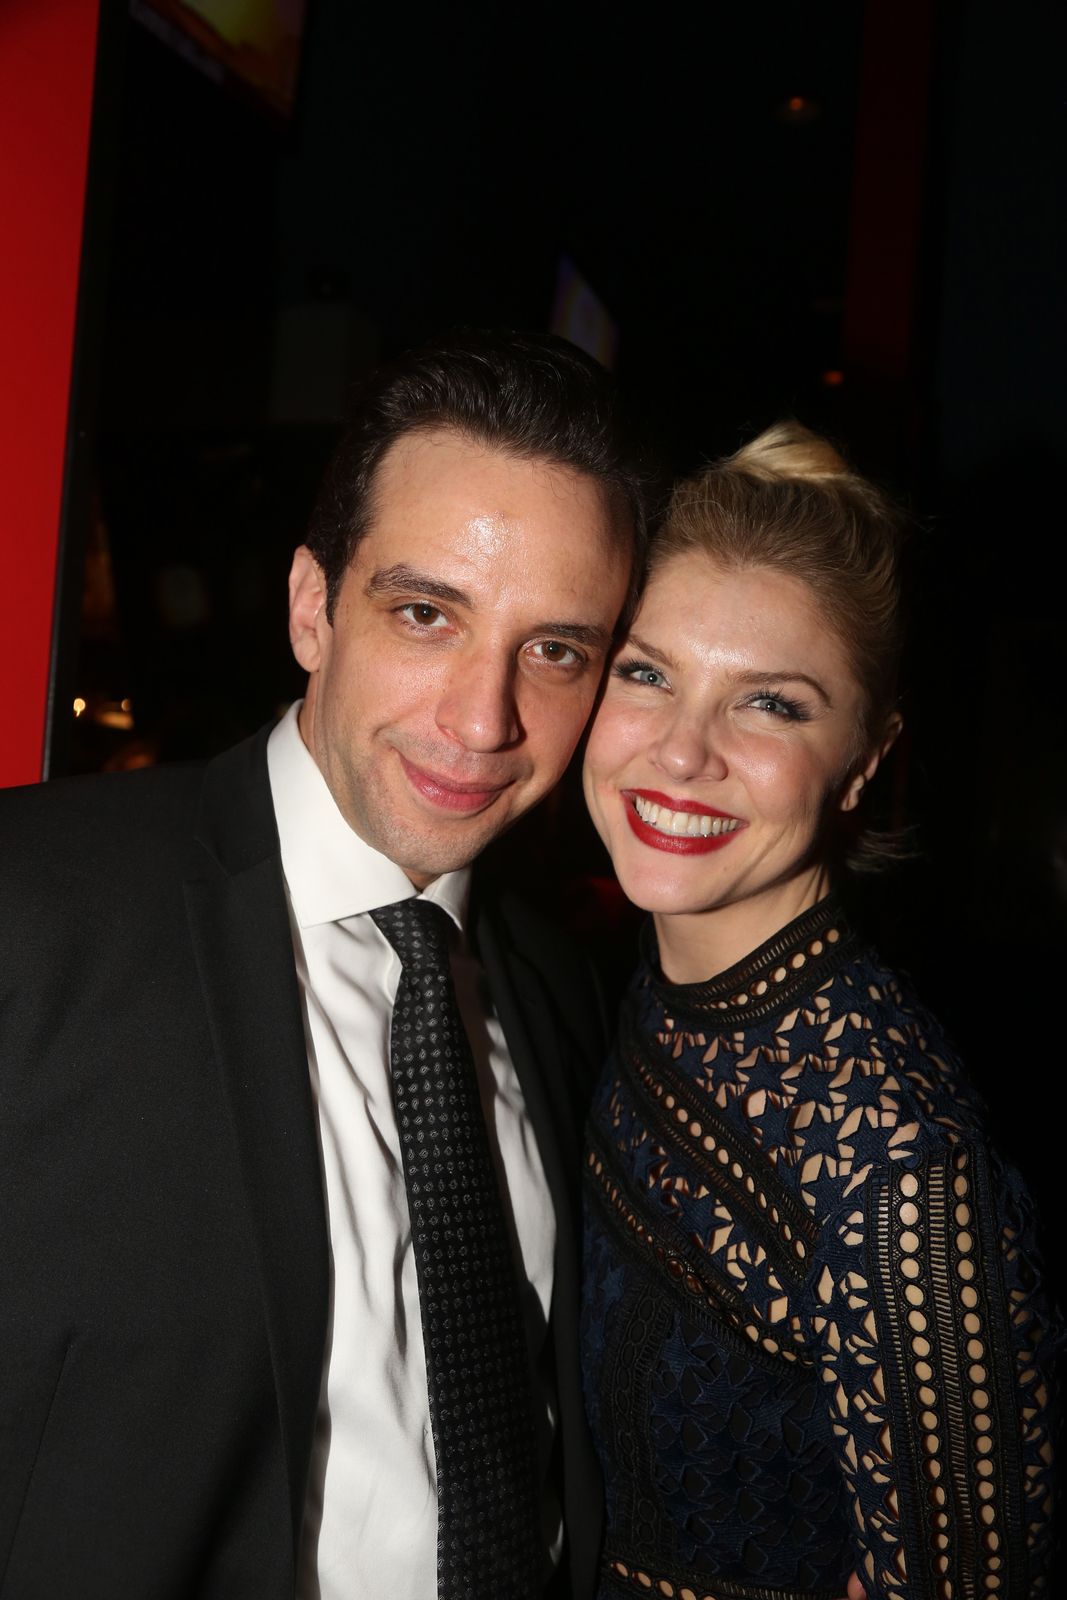 Nick Cordero and Amanda Kloots at the Manhattan Concert Production's Broadway Series "Crazy For You" One Night Only Production after-party on February 19, 2017, in New York City | Photo: Bruce Glikas/FilmMagic/Getty Images